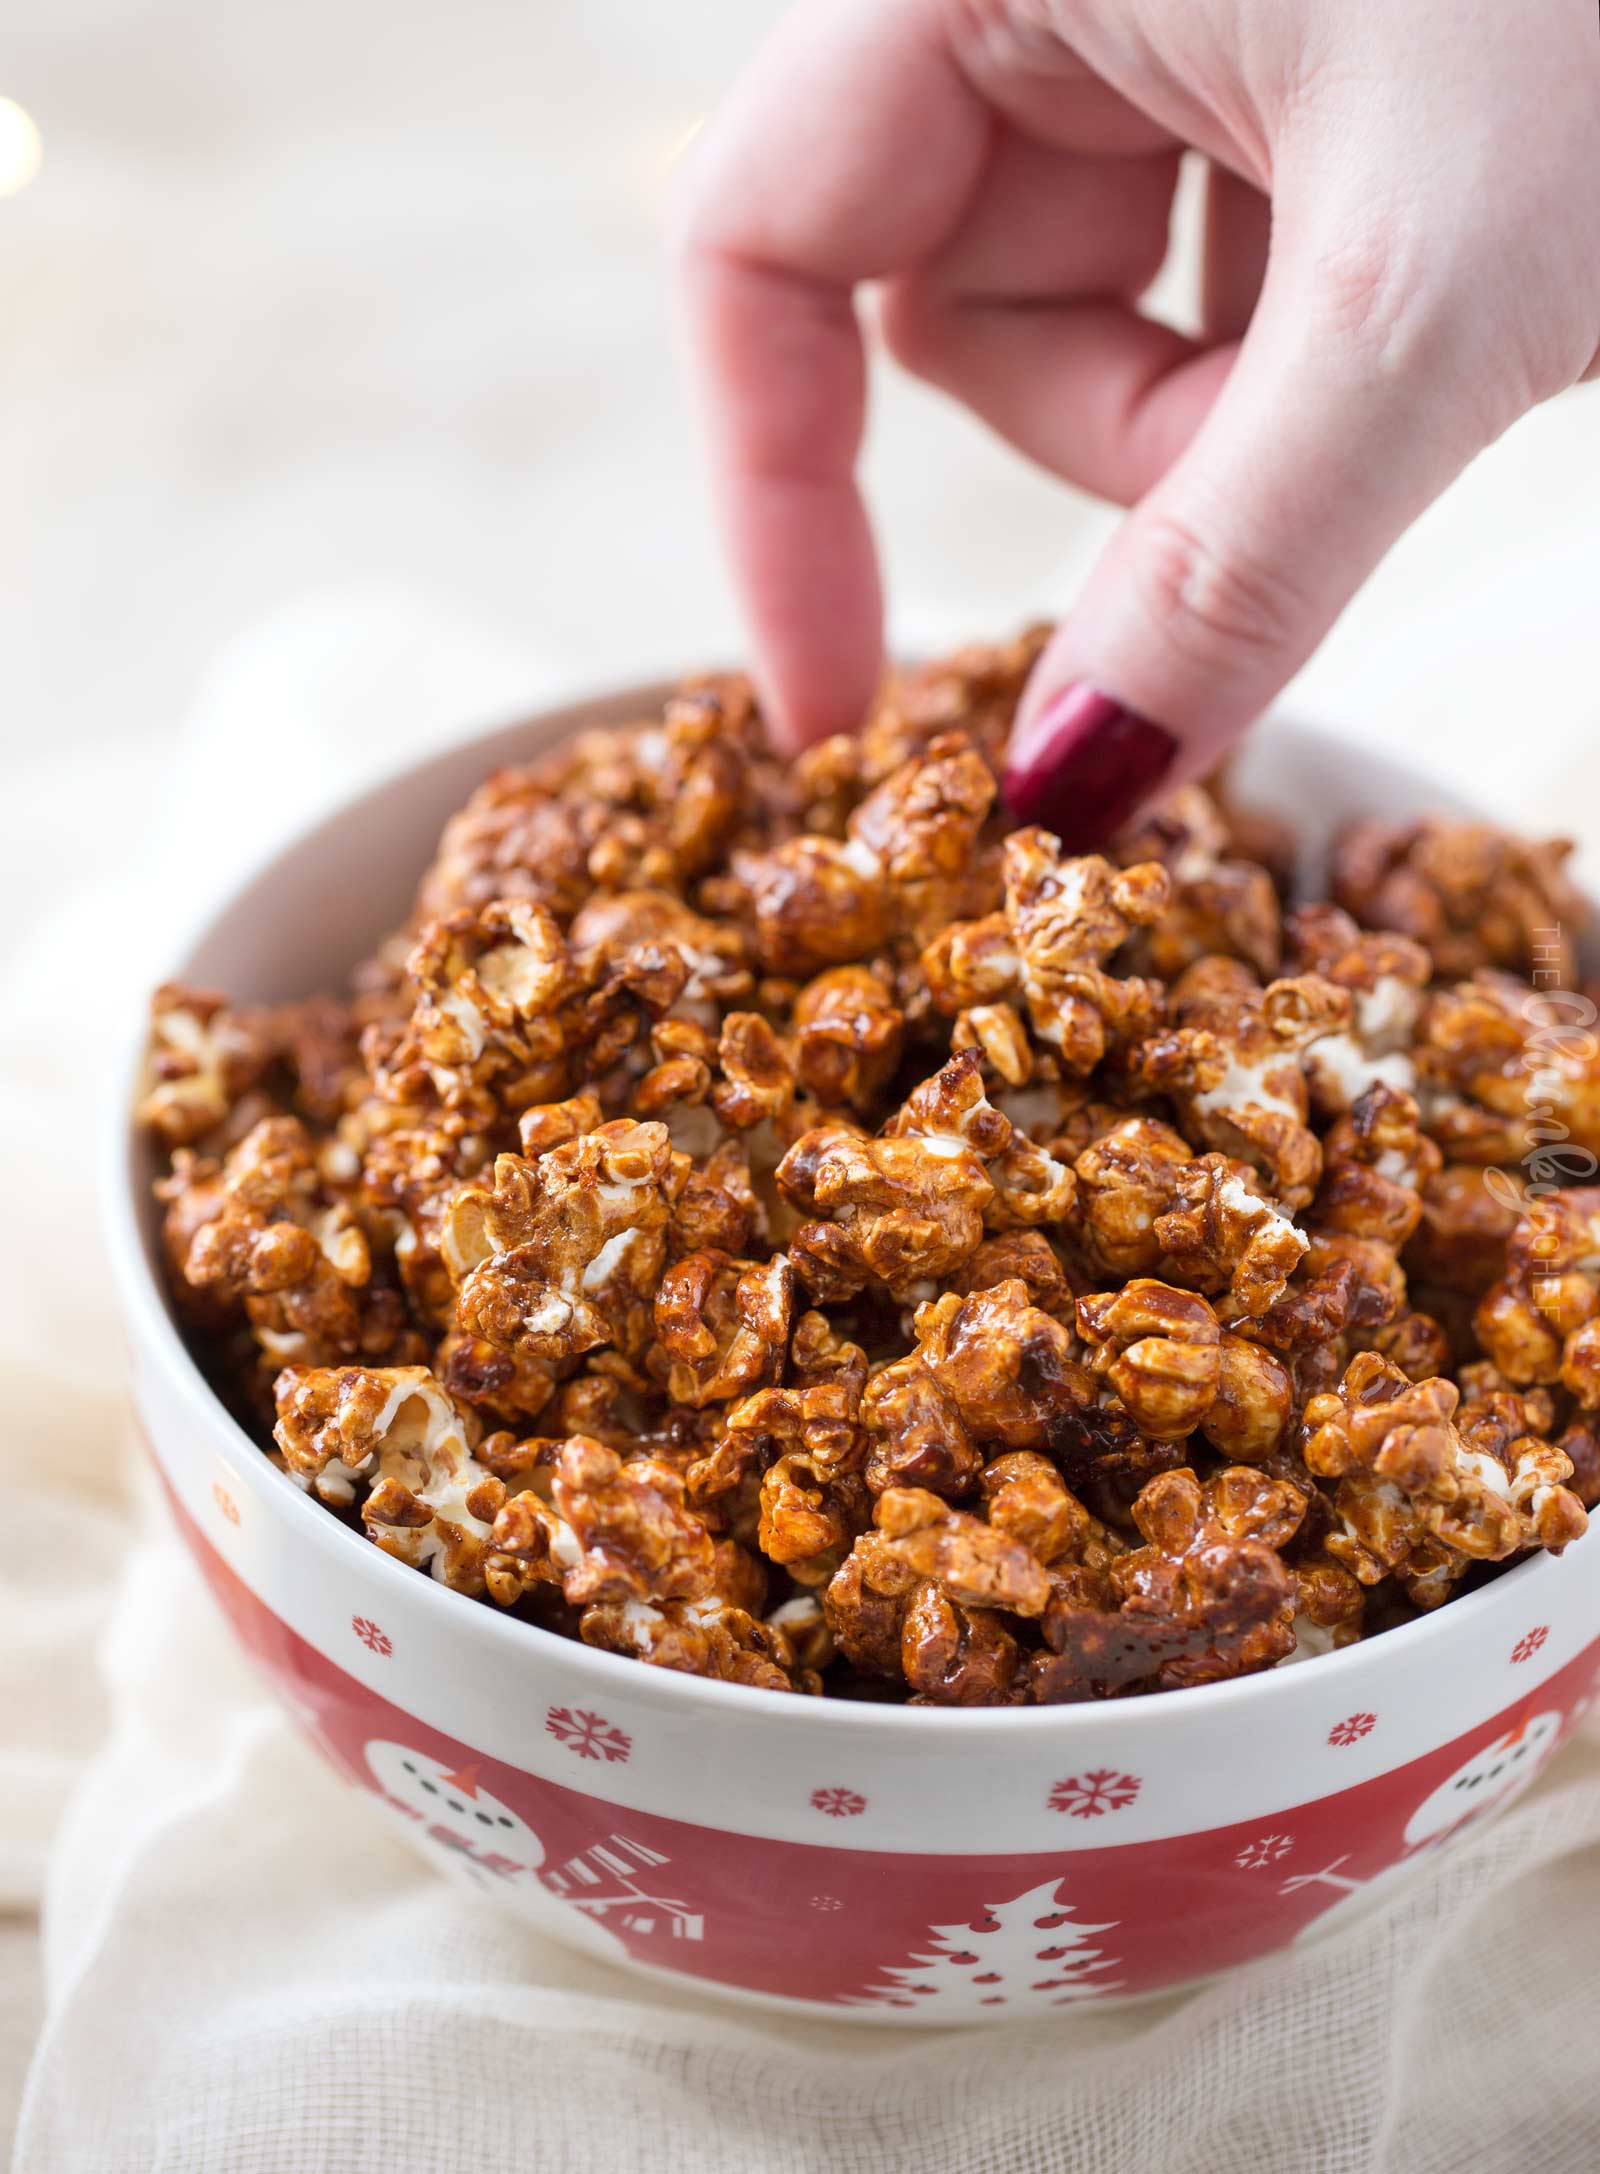 Gingerbread Caramel Corn | Classic caramel corn combines with gingerbread spices in the best caramel popcorn EVER!  You'll  love snacking on this sweet and crunchy popcorn! | The Chunky Chef | #popcorn #caramelcorn #homemadecaramel #snackrecipes #homemade #gingerbread